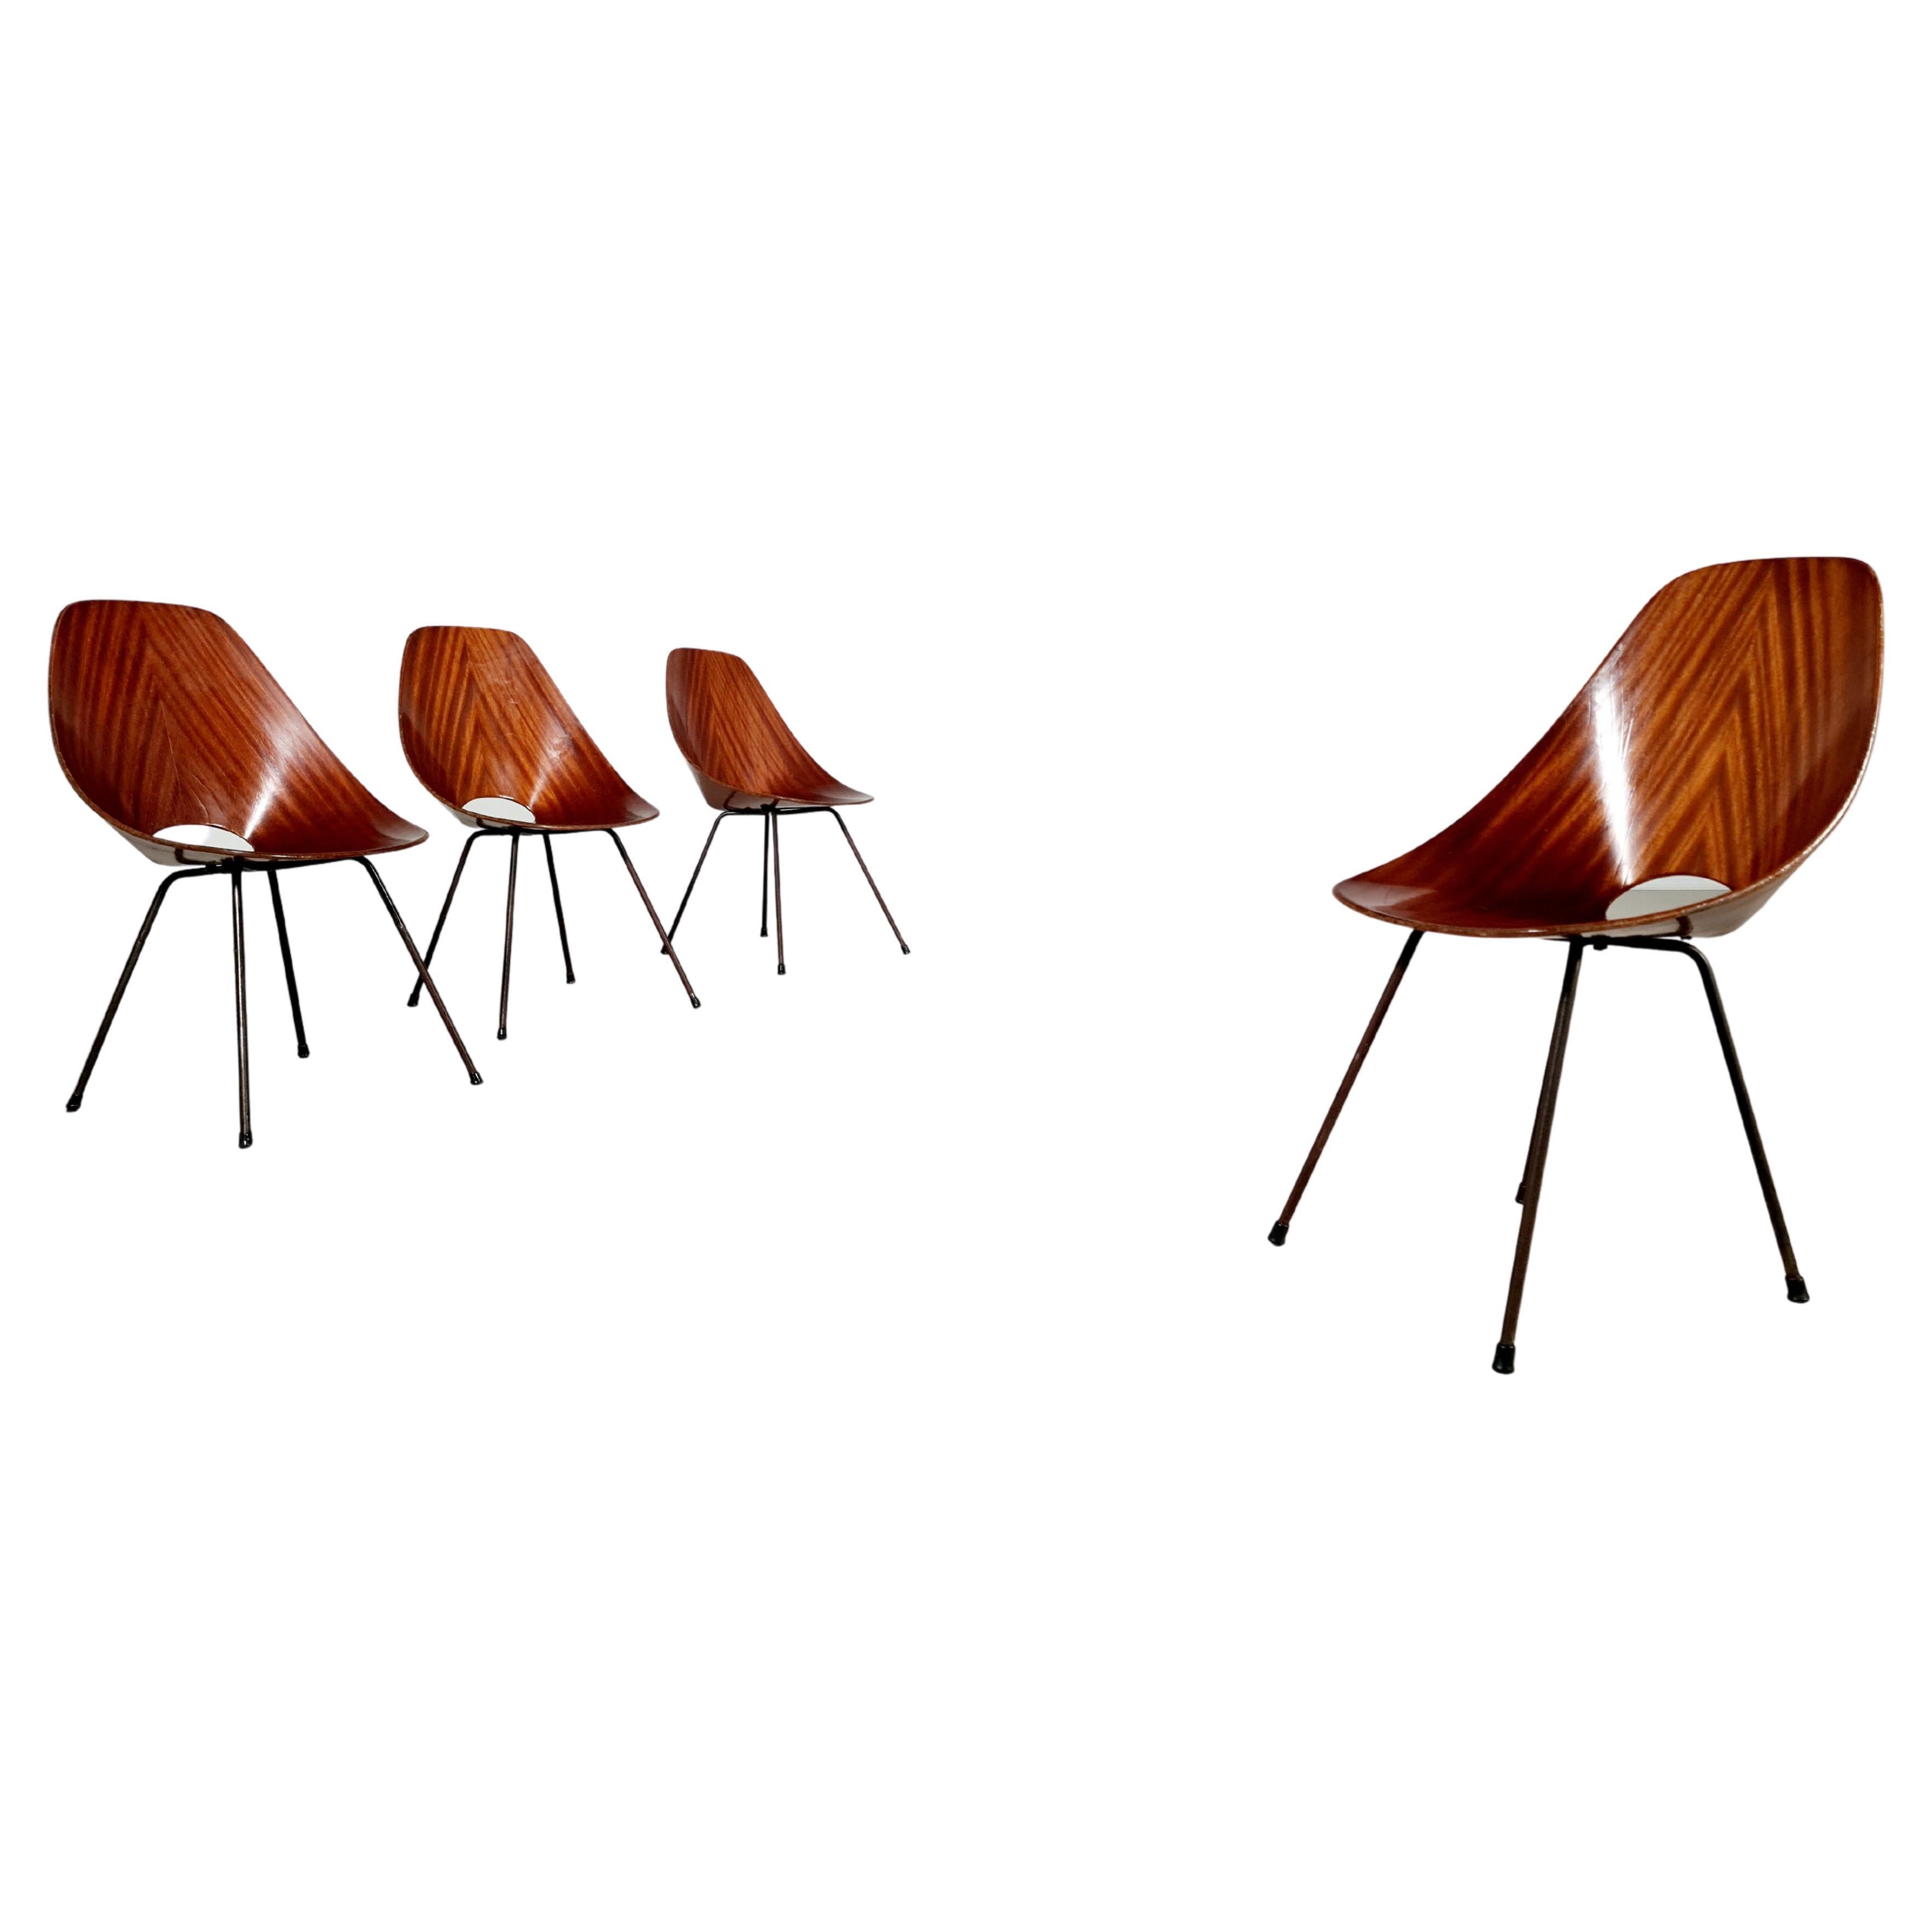 Vittorio Nobili Chairs - 21 For Sale at 1stDibs